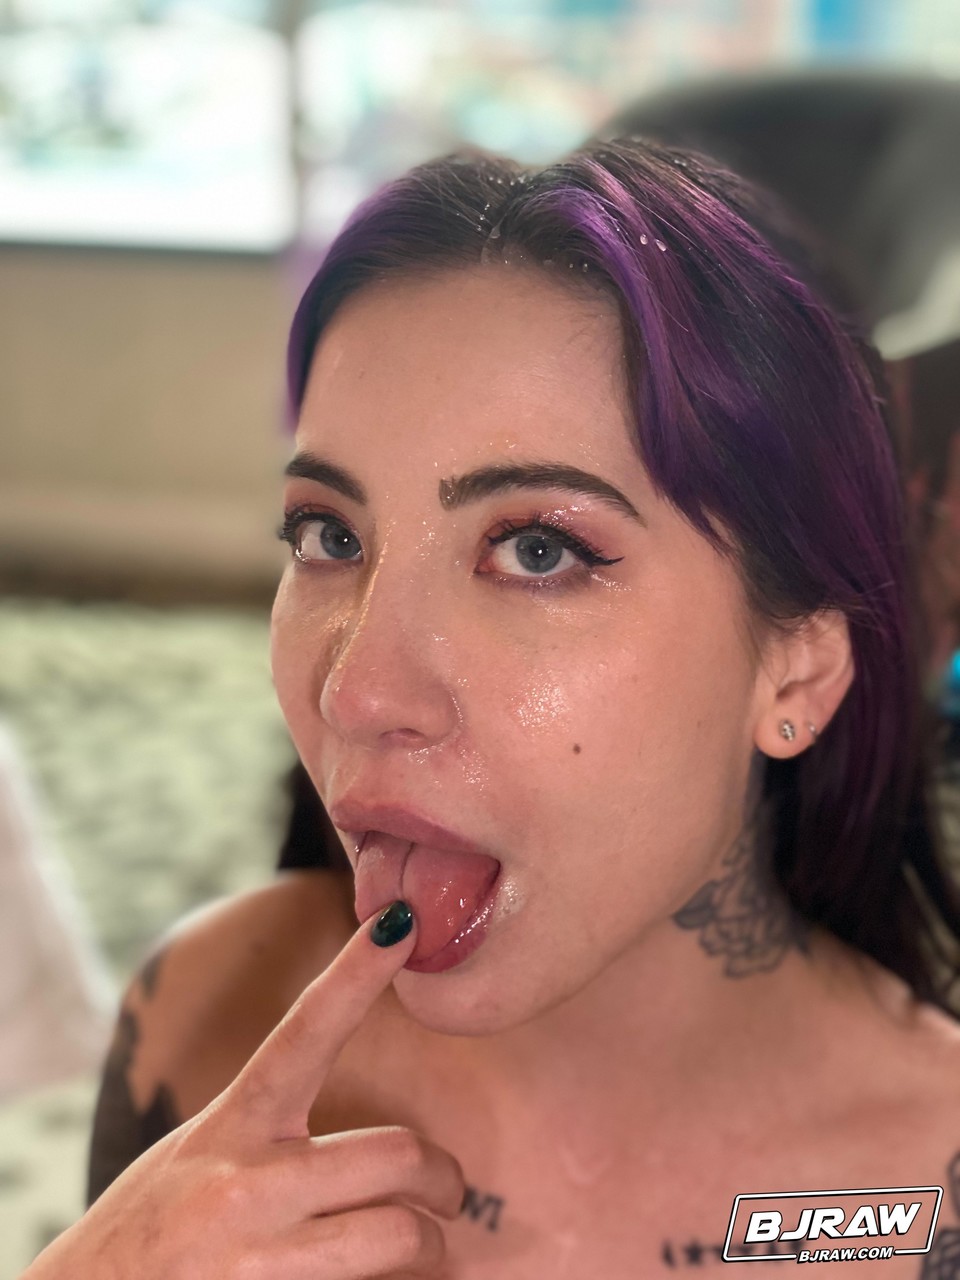 Brunette babe with tattoos Charlotte Sartre takes a dick in her mouth 포르노 사진 #424561435 | BJ Raw Pics, Charlotte Sartre, Tattoo, 모바일 포르노